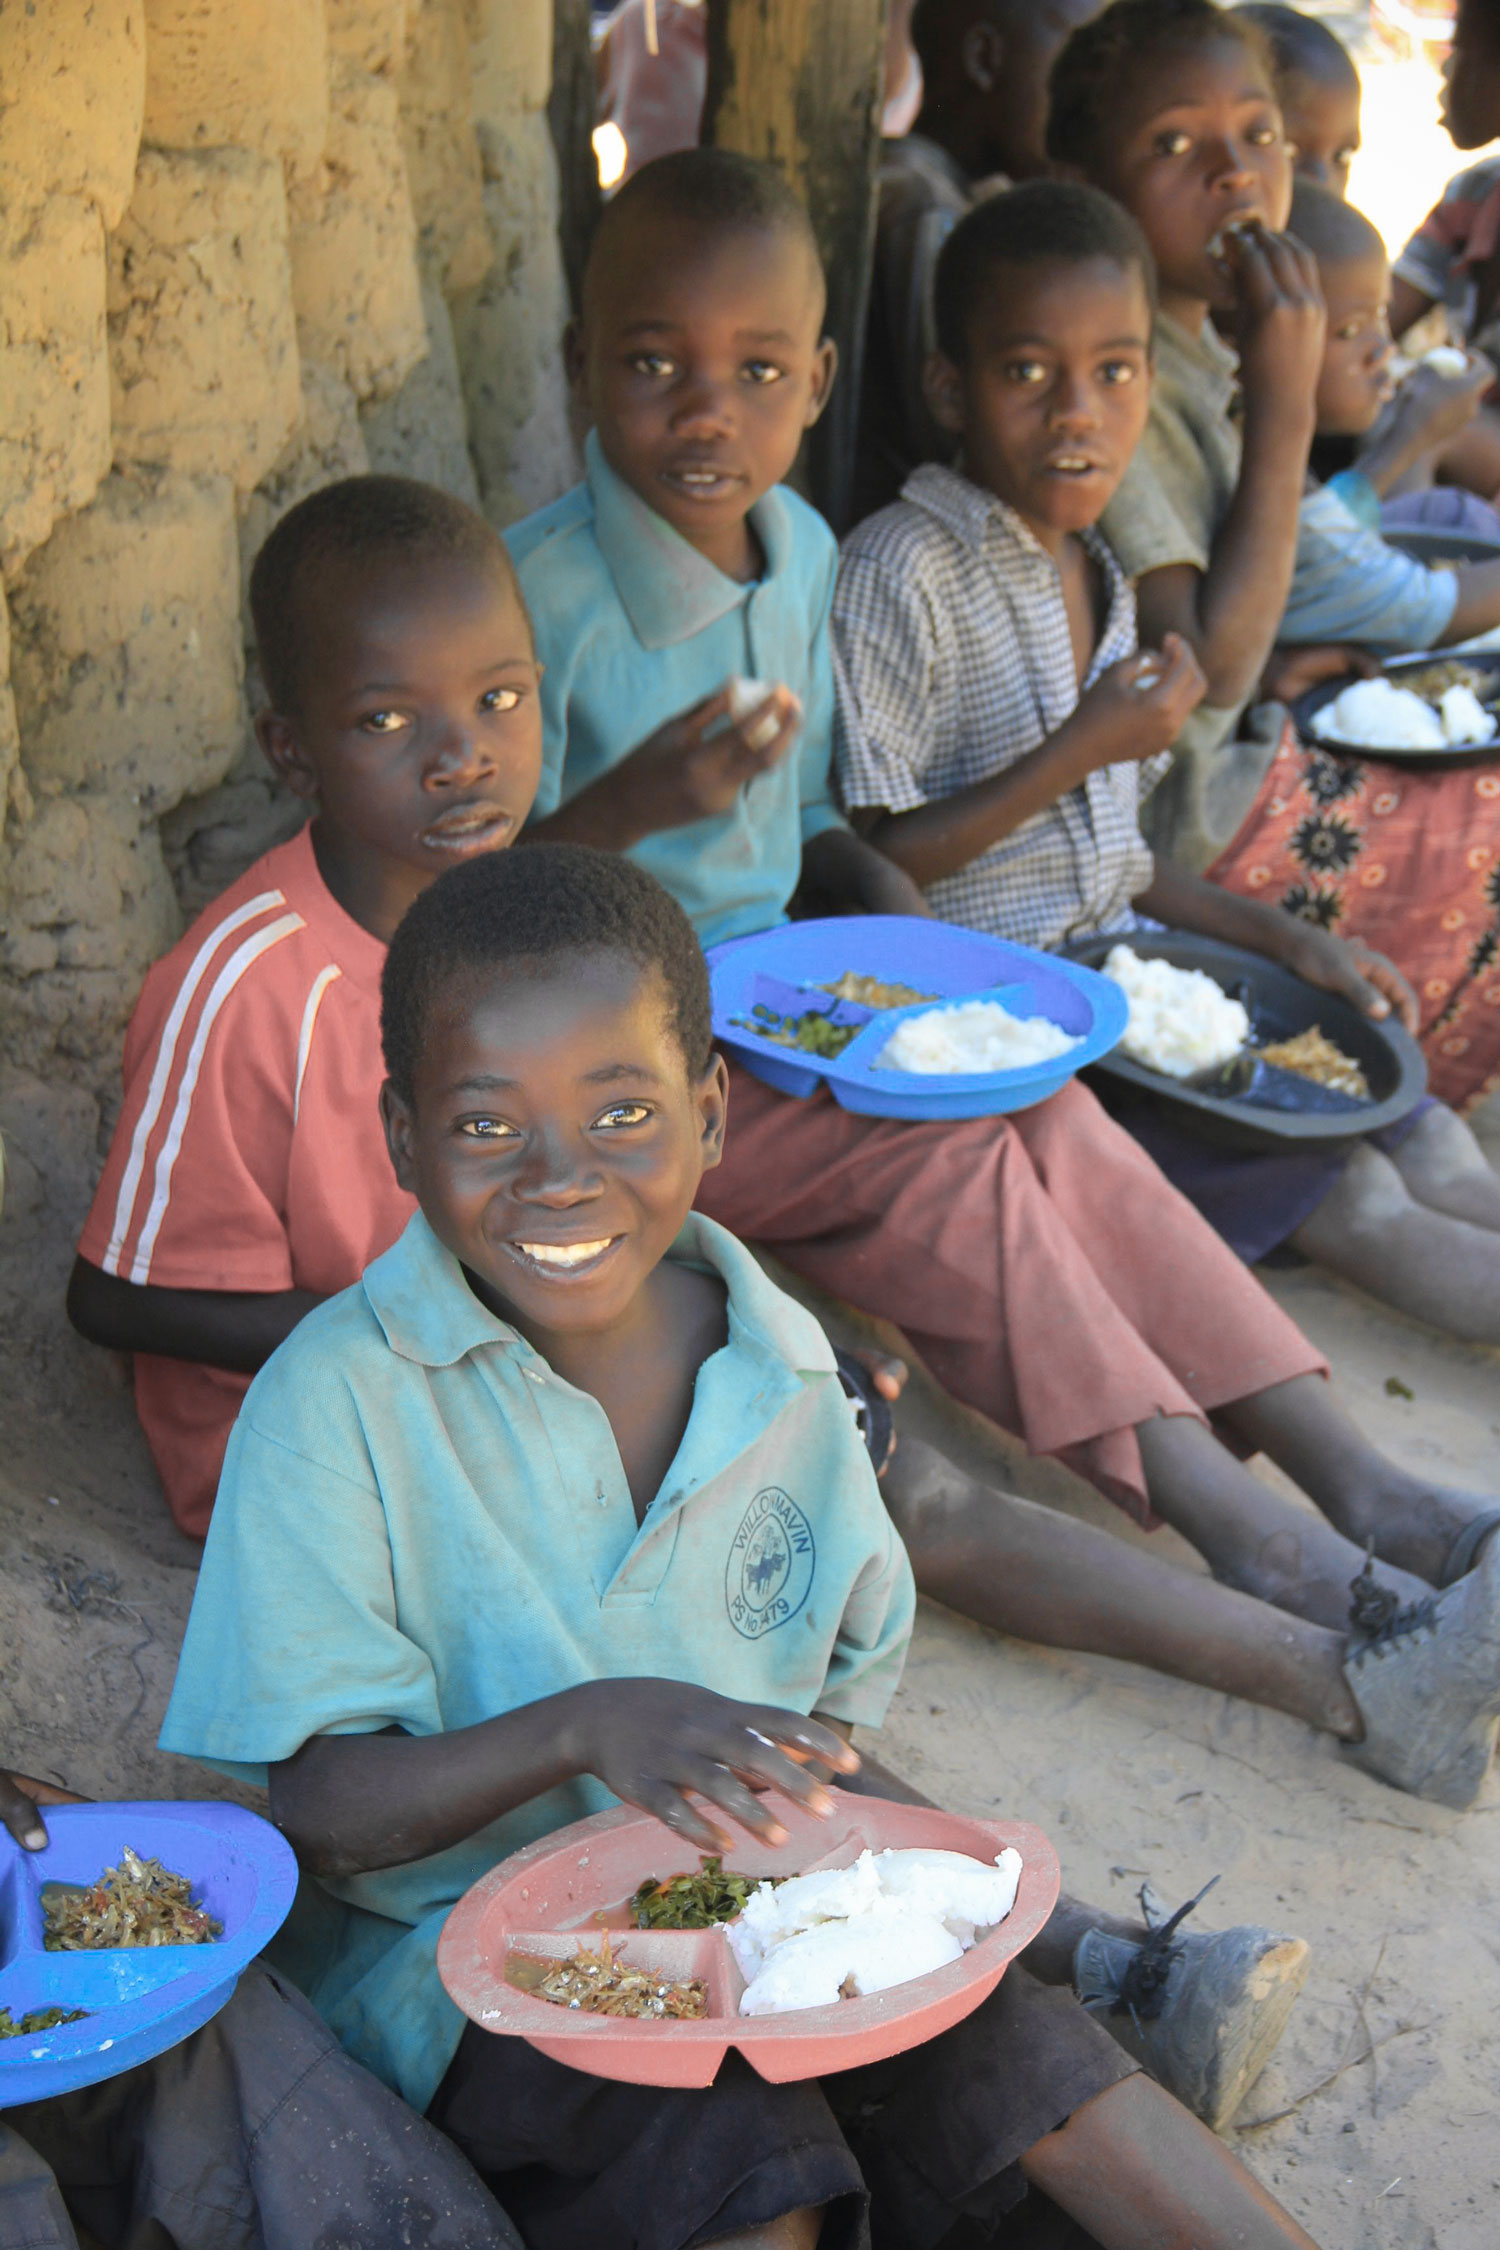  150 of the most vulnerable children in Chibuli receive a daily meal, access to education and access to basic health care. 